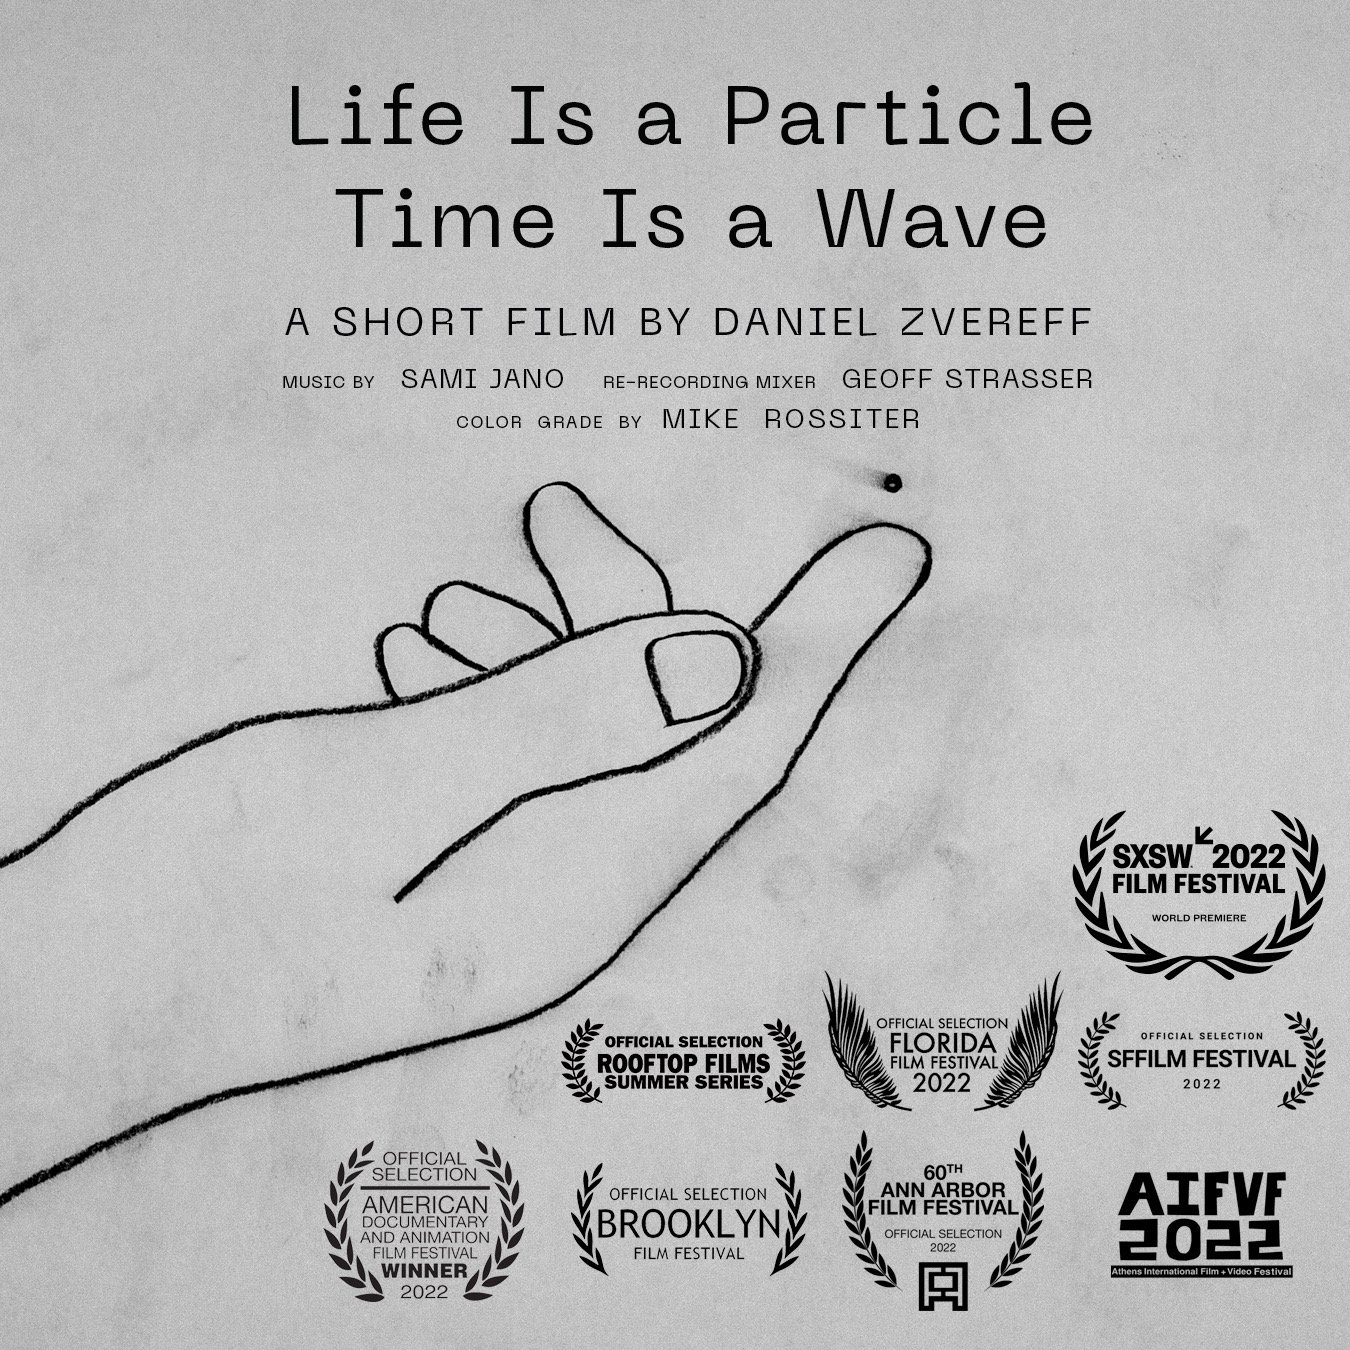 Life is a Particle, Time is a Wave - Daniel Zverref